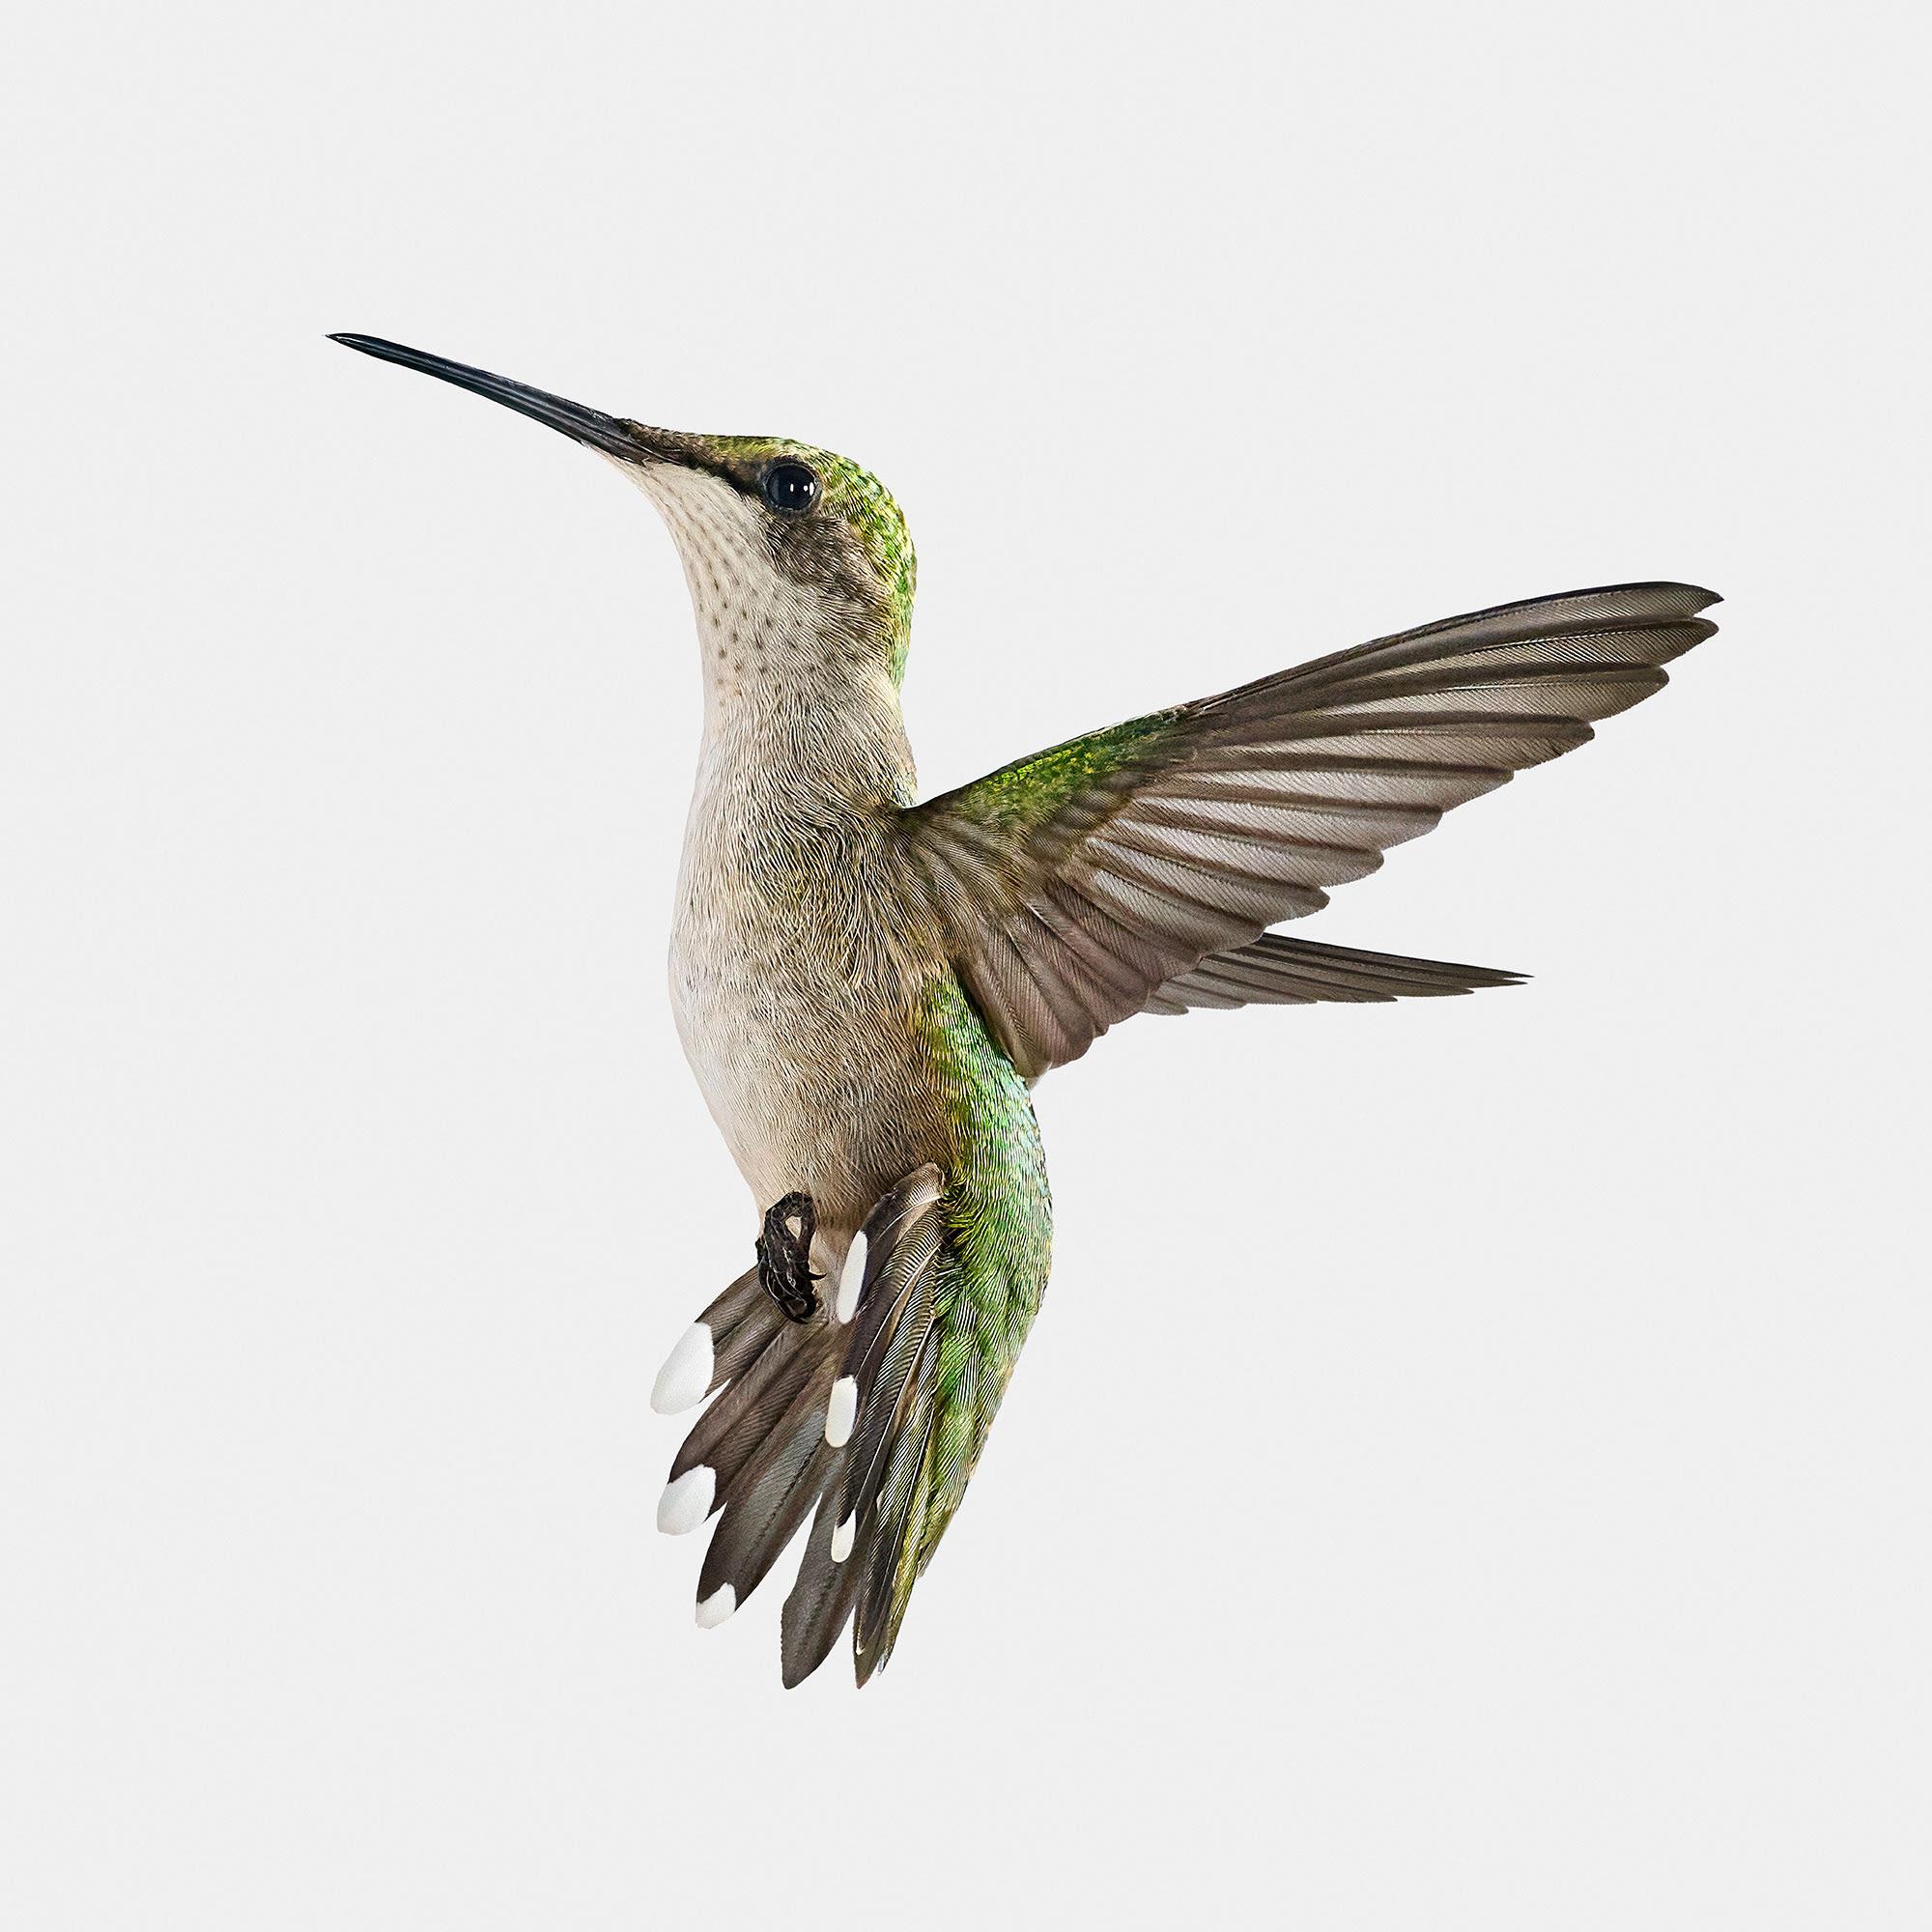 A month ago, I made a trip to Paris. Paris, Texas, that is.

Through mutual friends, I found an owner of a ranch who had two large hummingbird feeders and was going through over two gallons of feed each day, feeding a flock of hummingbirds.

I have